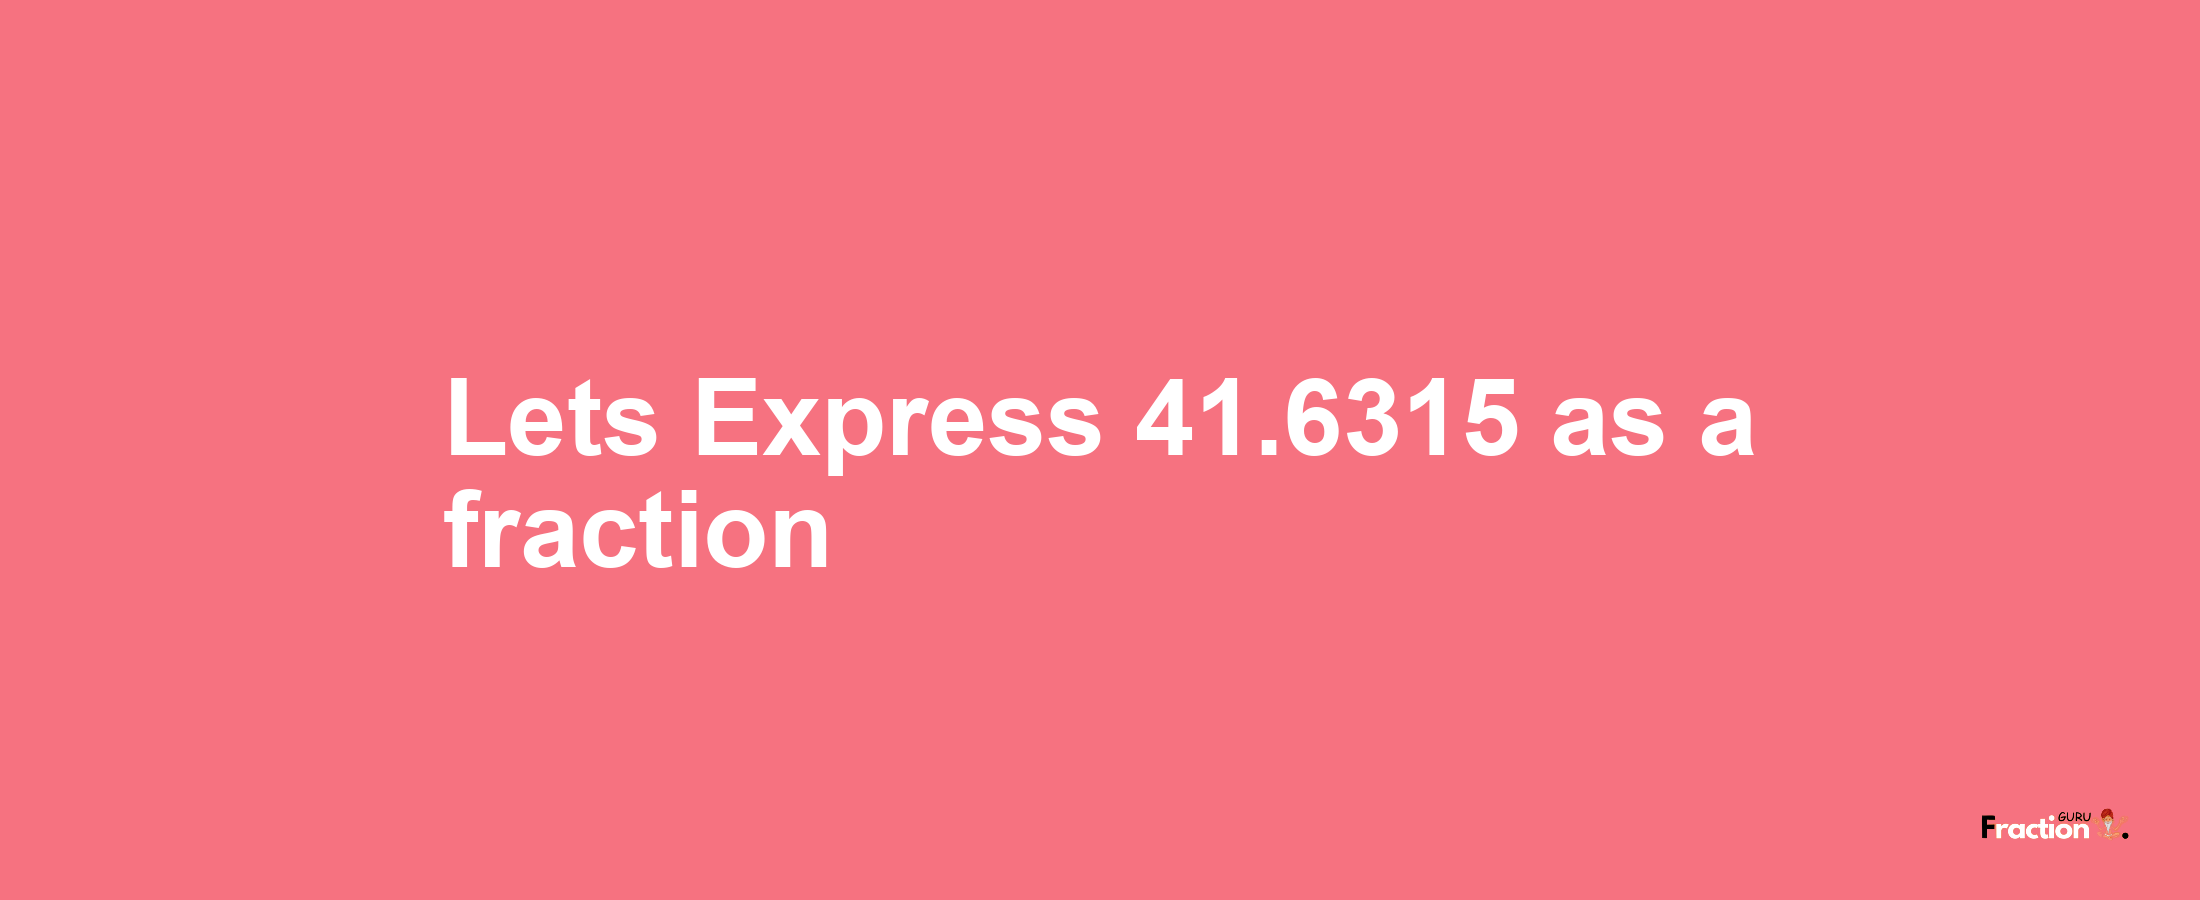 Lets Express 41.6315 as afraction